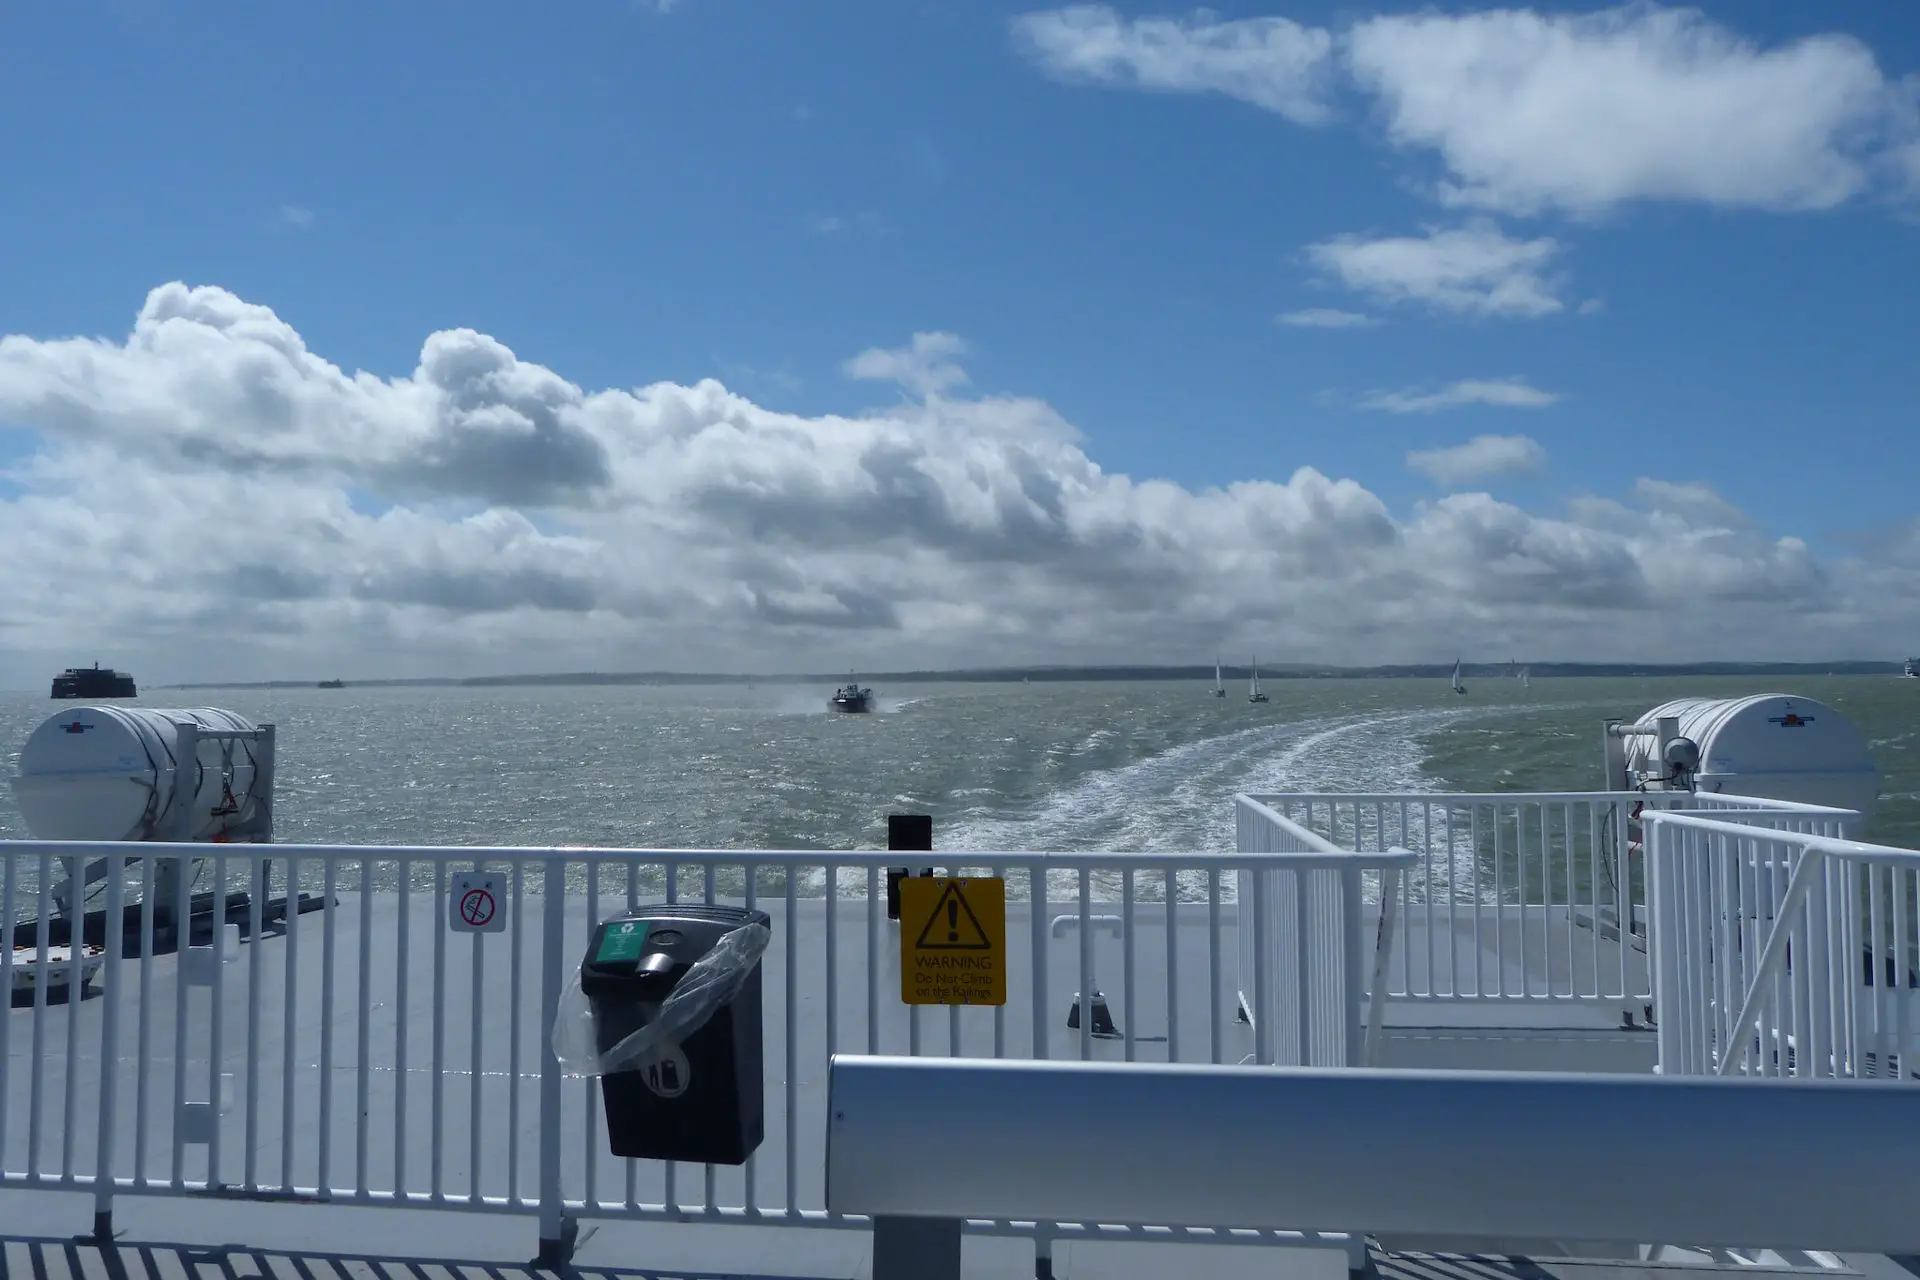 isle of wight ferry wash from the catamaran (fastcat)